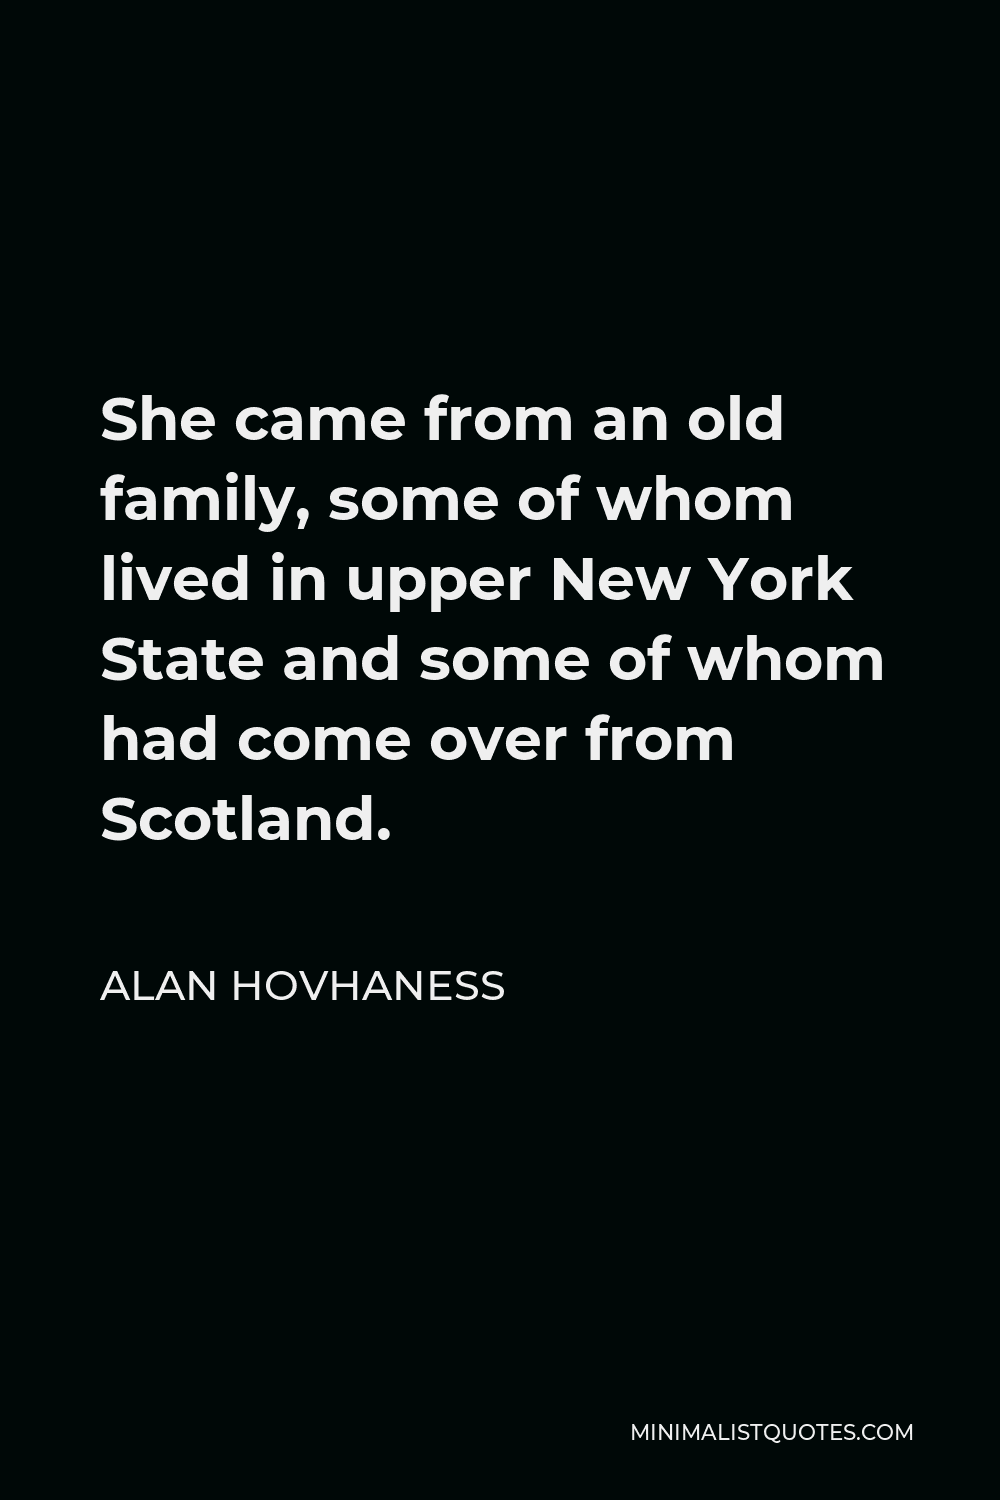 Alan Hovhaness Quote - She came from an old family, some of whom lived in upper New York State and some of whom had come over from Scotland.